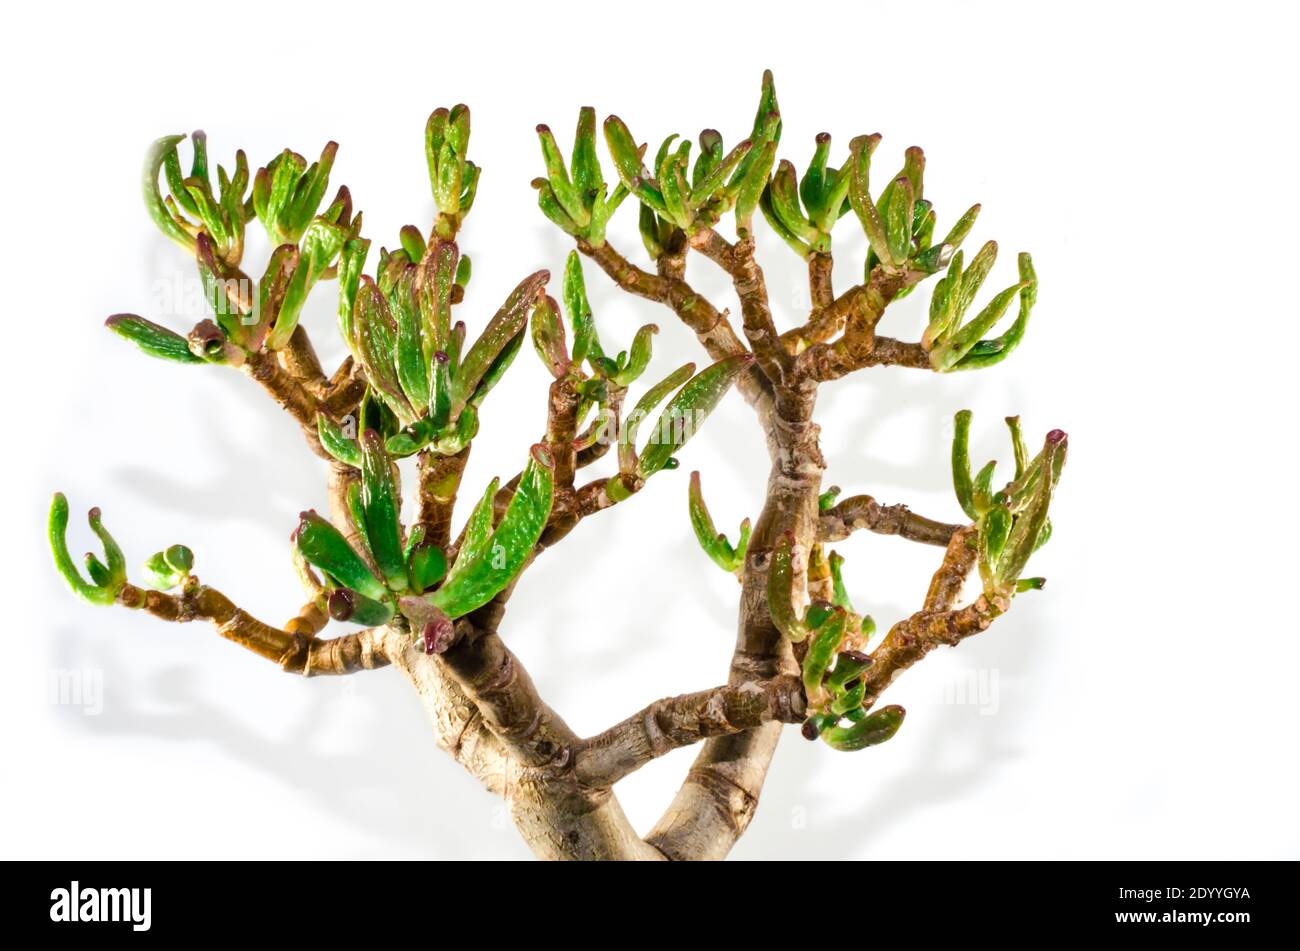 Drying leaves of a succulent plant called crassula ovata gollum or hobbit in a white background. Selective focus on the leaves. Stock Photo